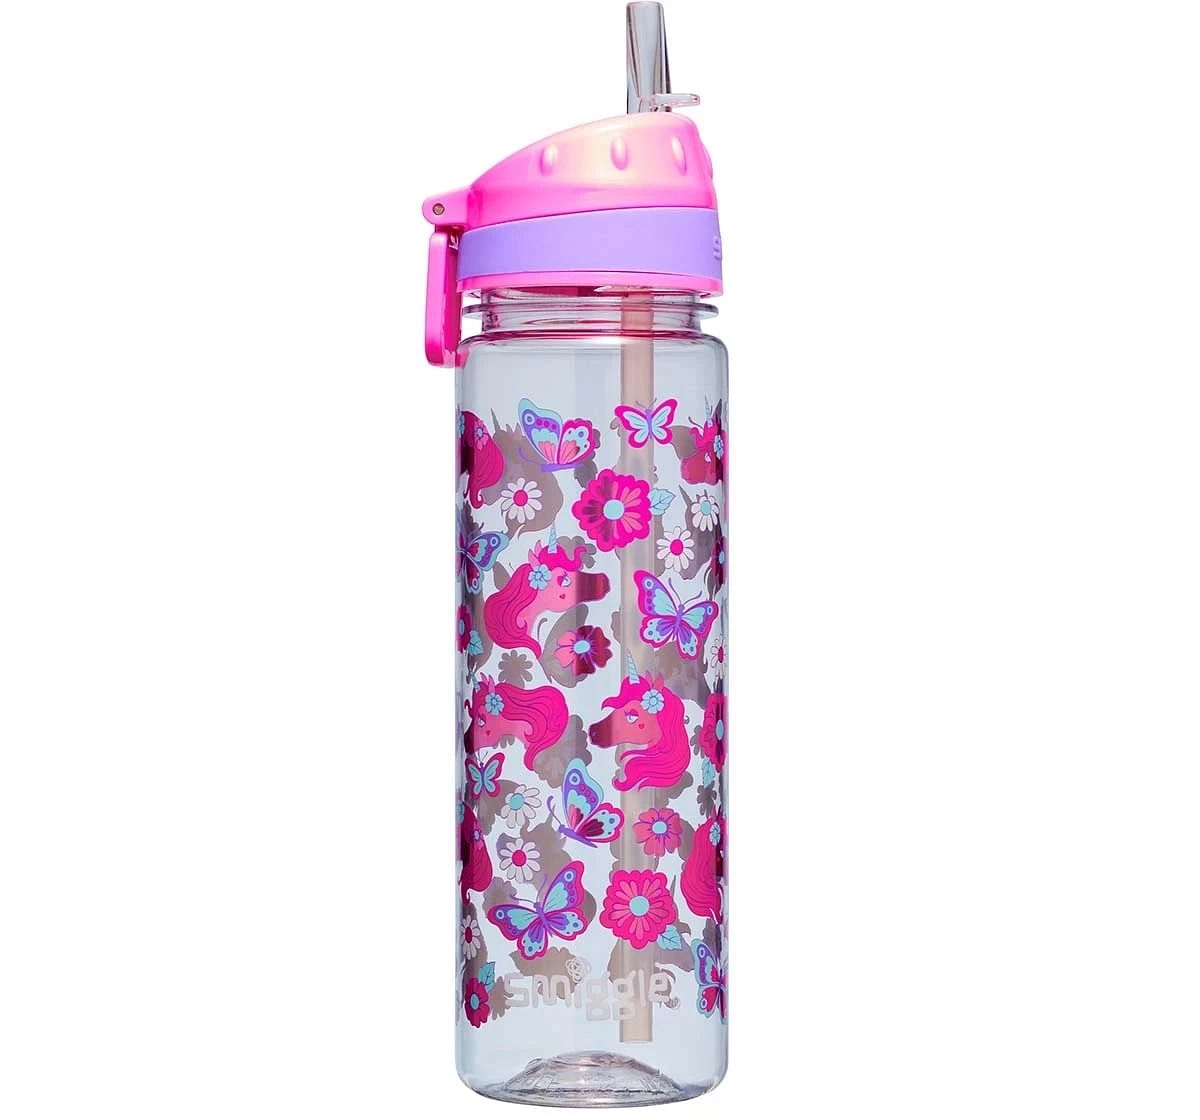 Smiggle Hey There Collection Bottles Plastic, Pink, 4Y+